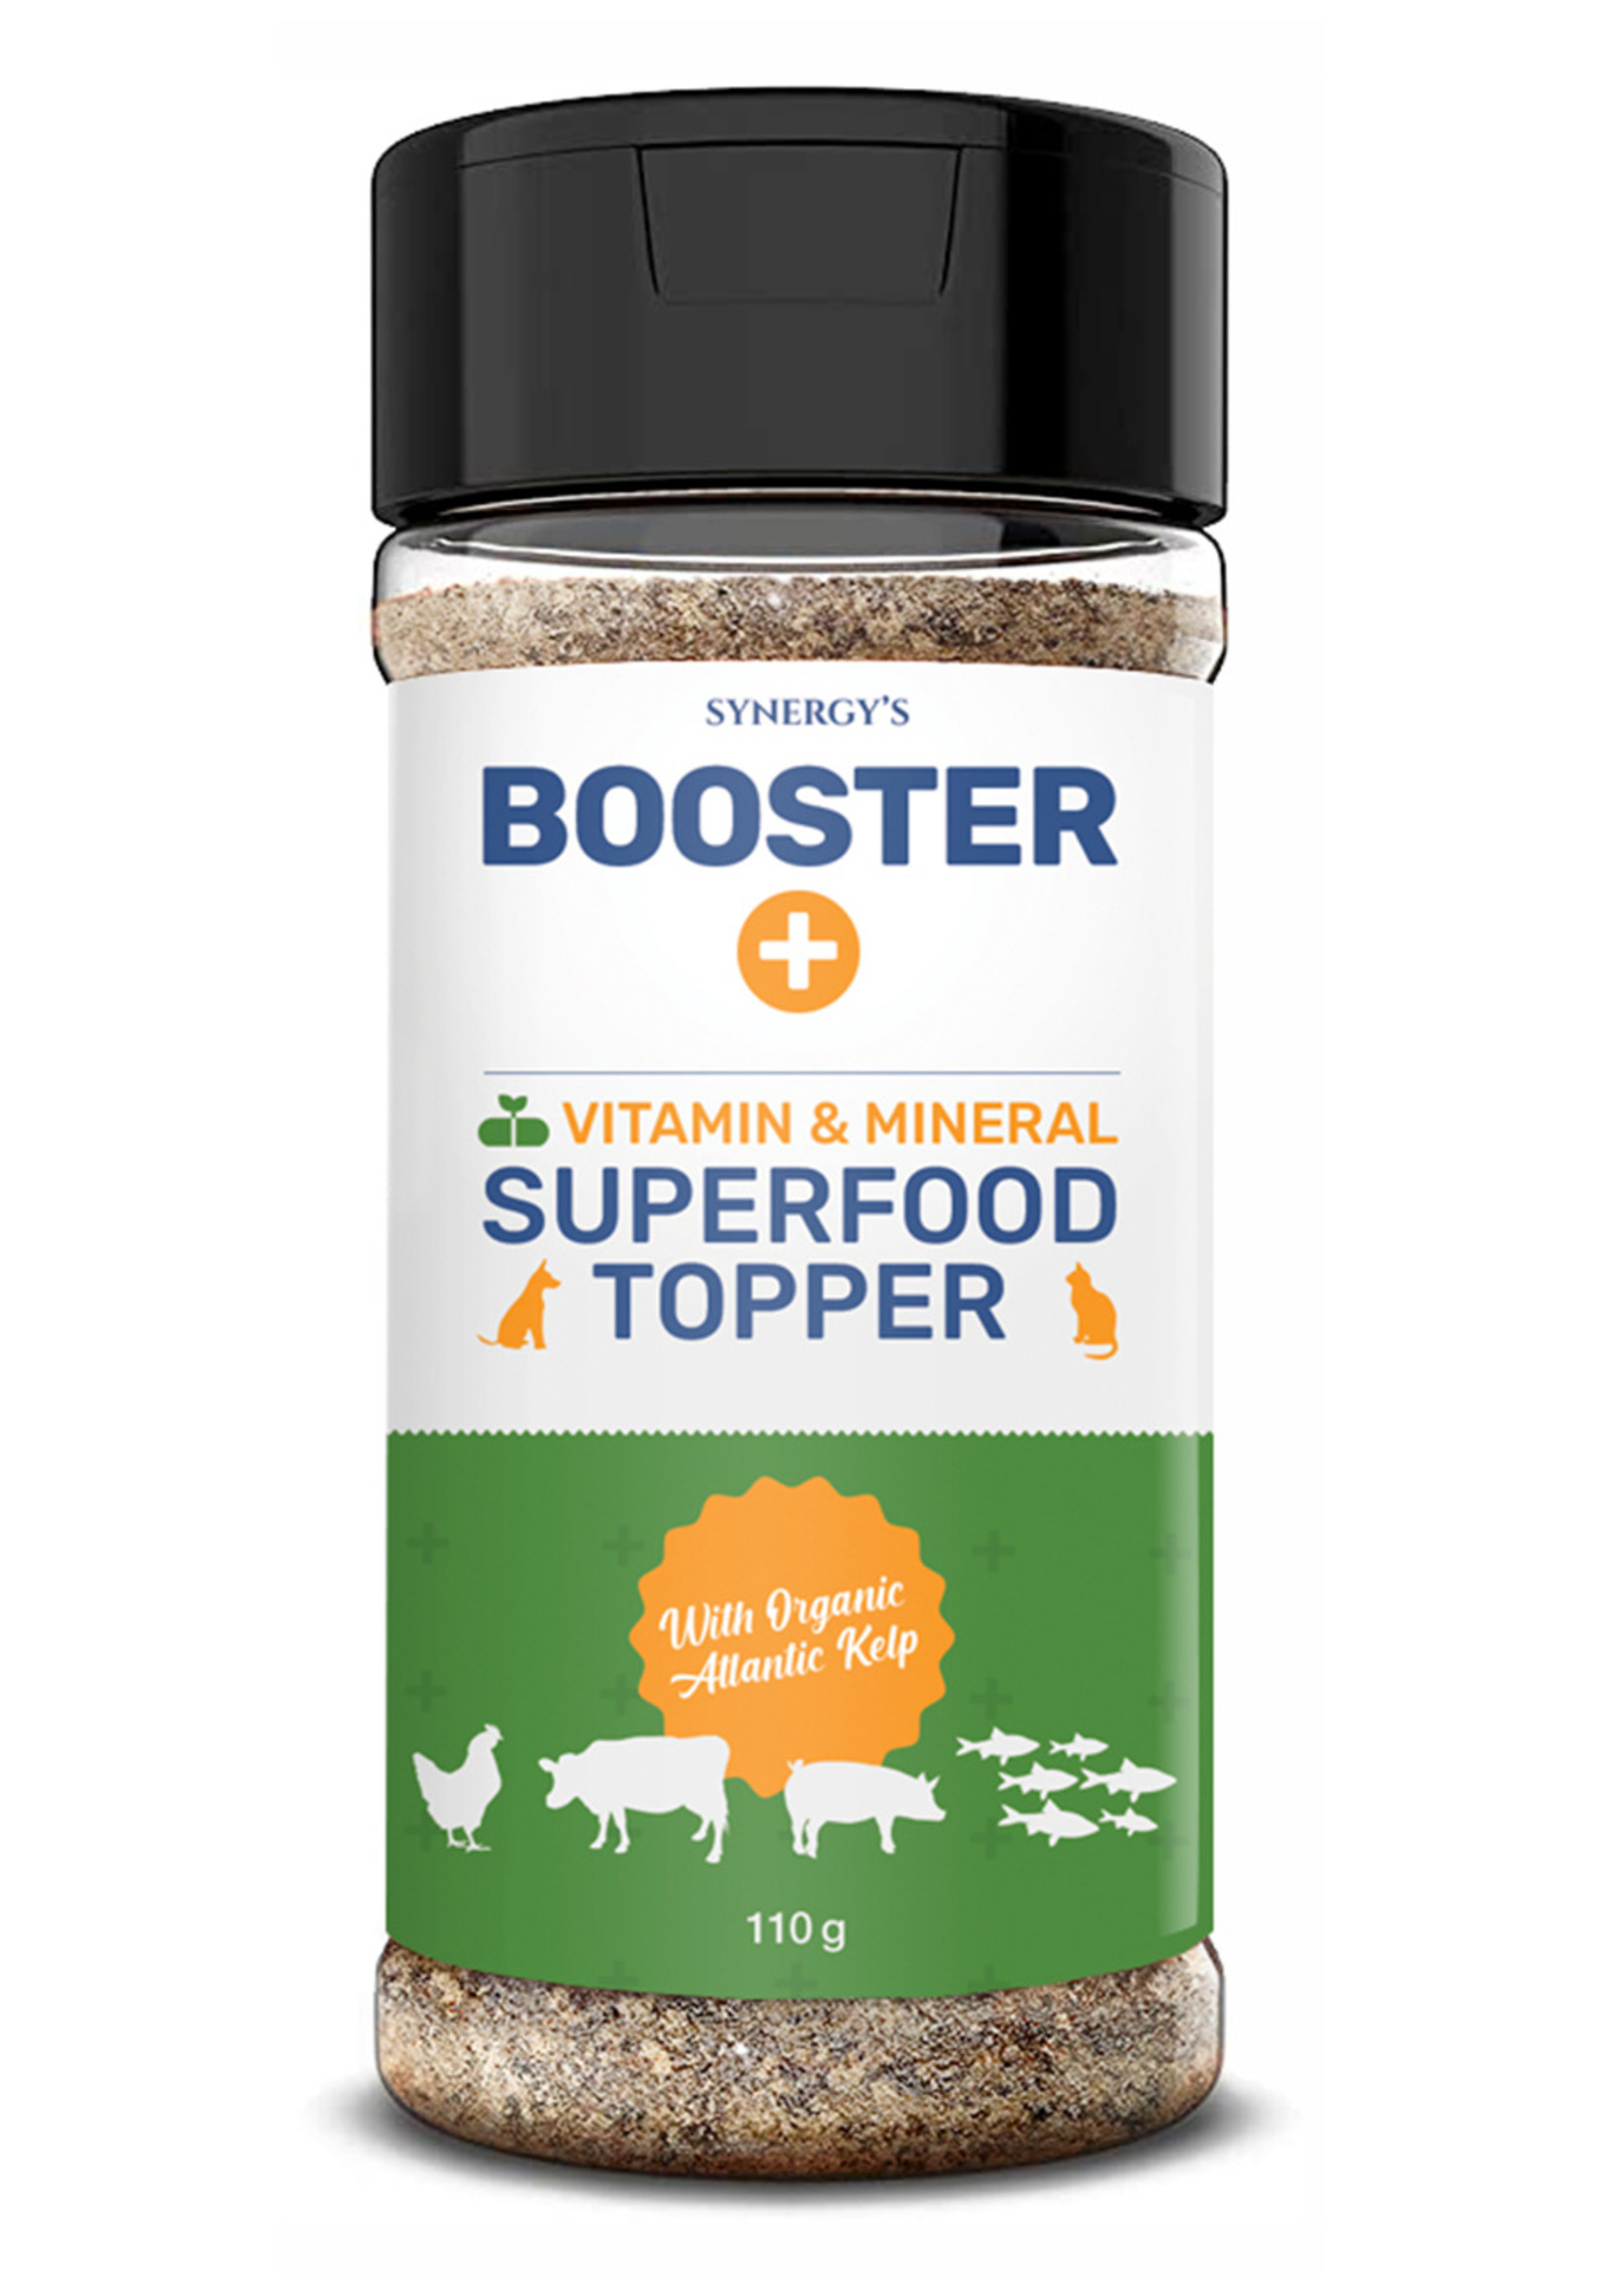 Totally Raw Synergy's - Vitamin & Mineral Booster Superfood Topper 110g